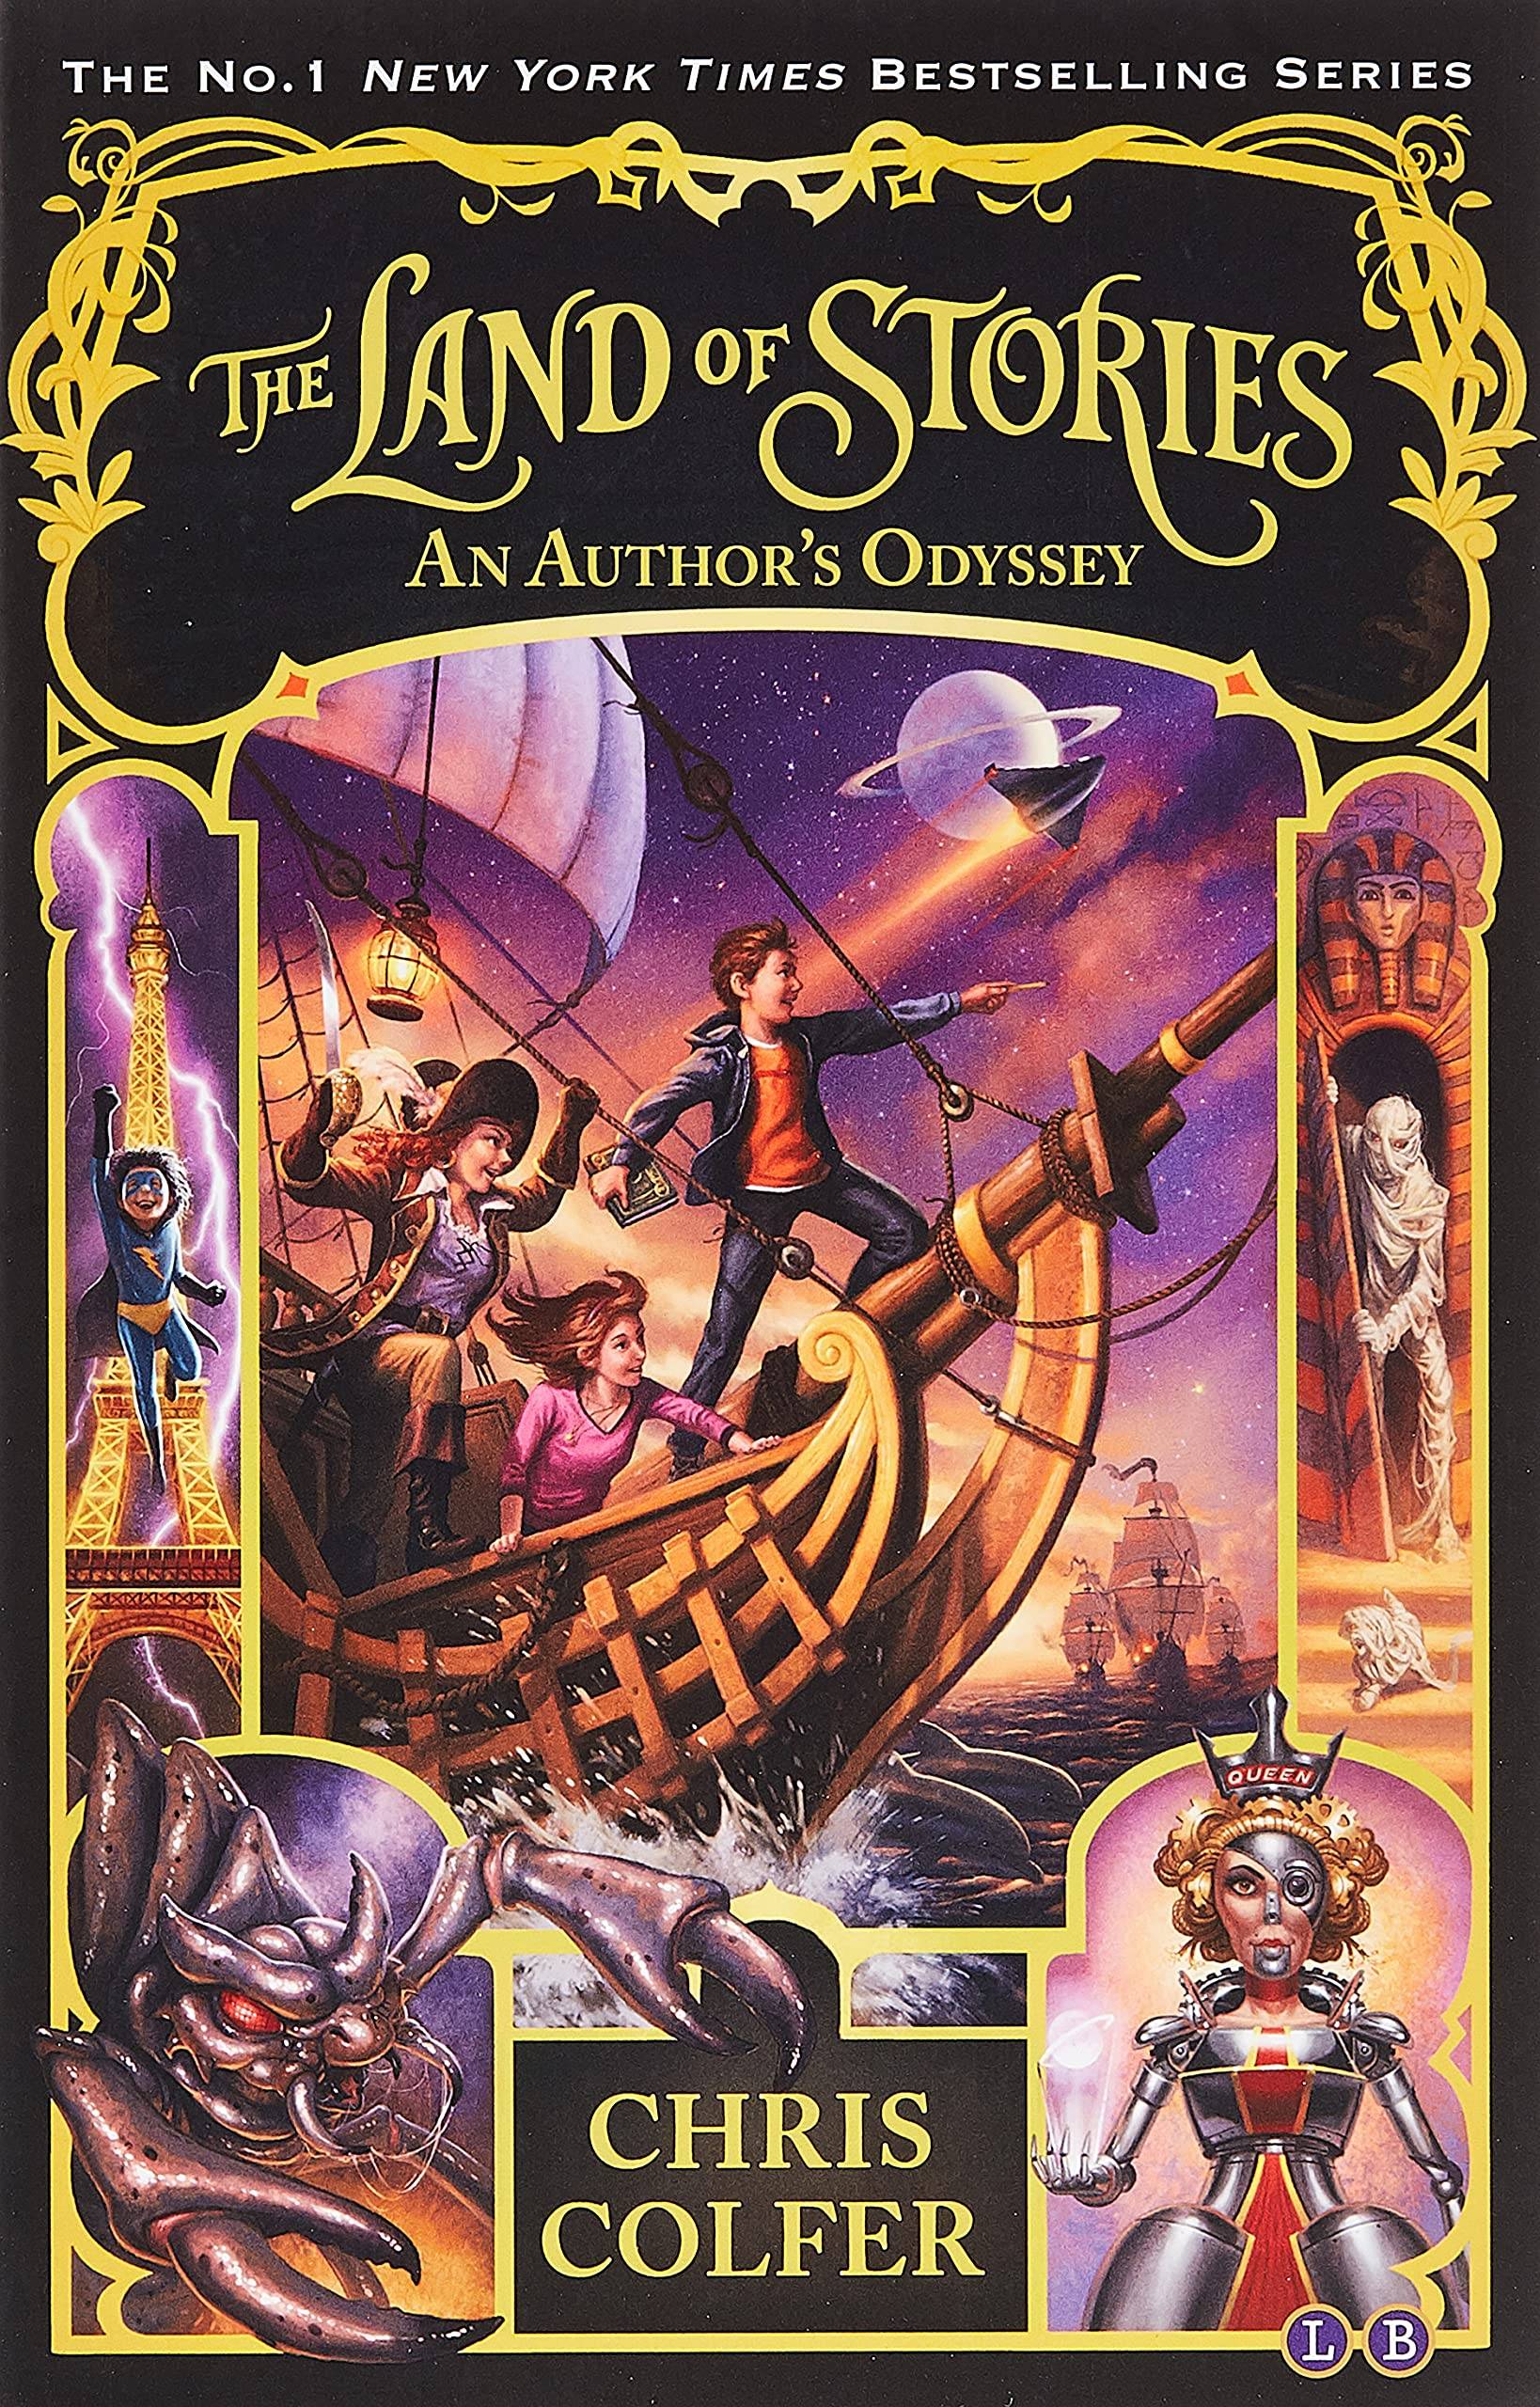 IMG : The Land of Stories An Authors Odyssey#5